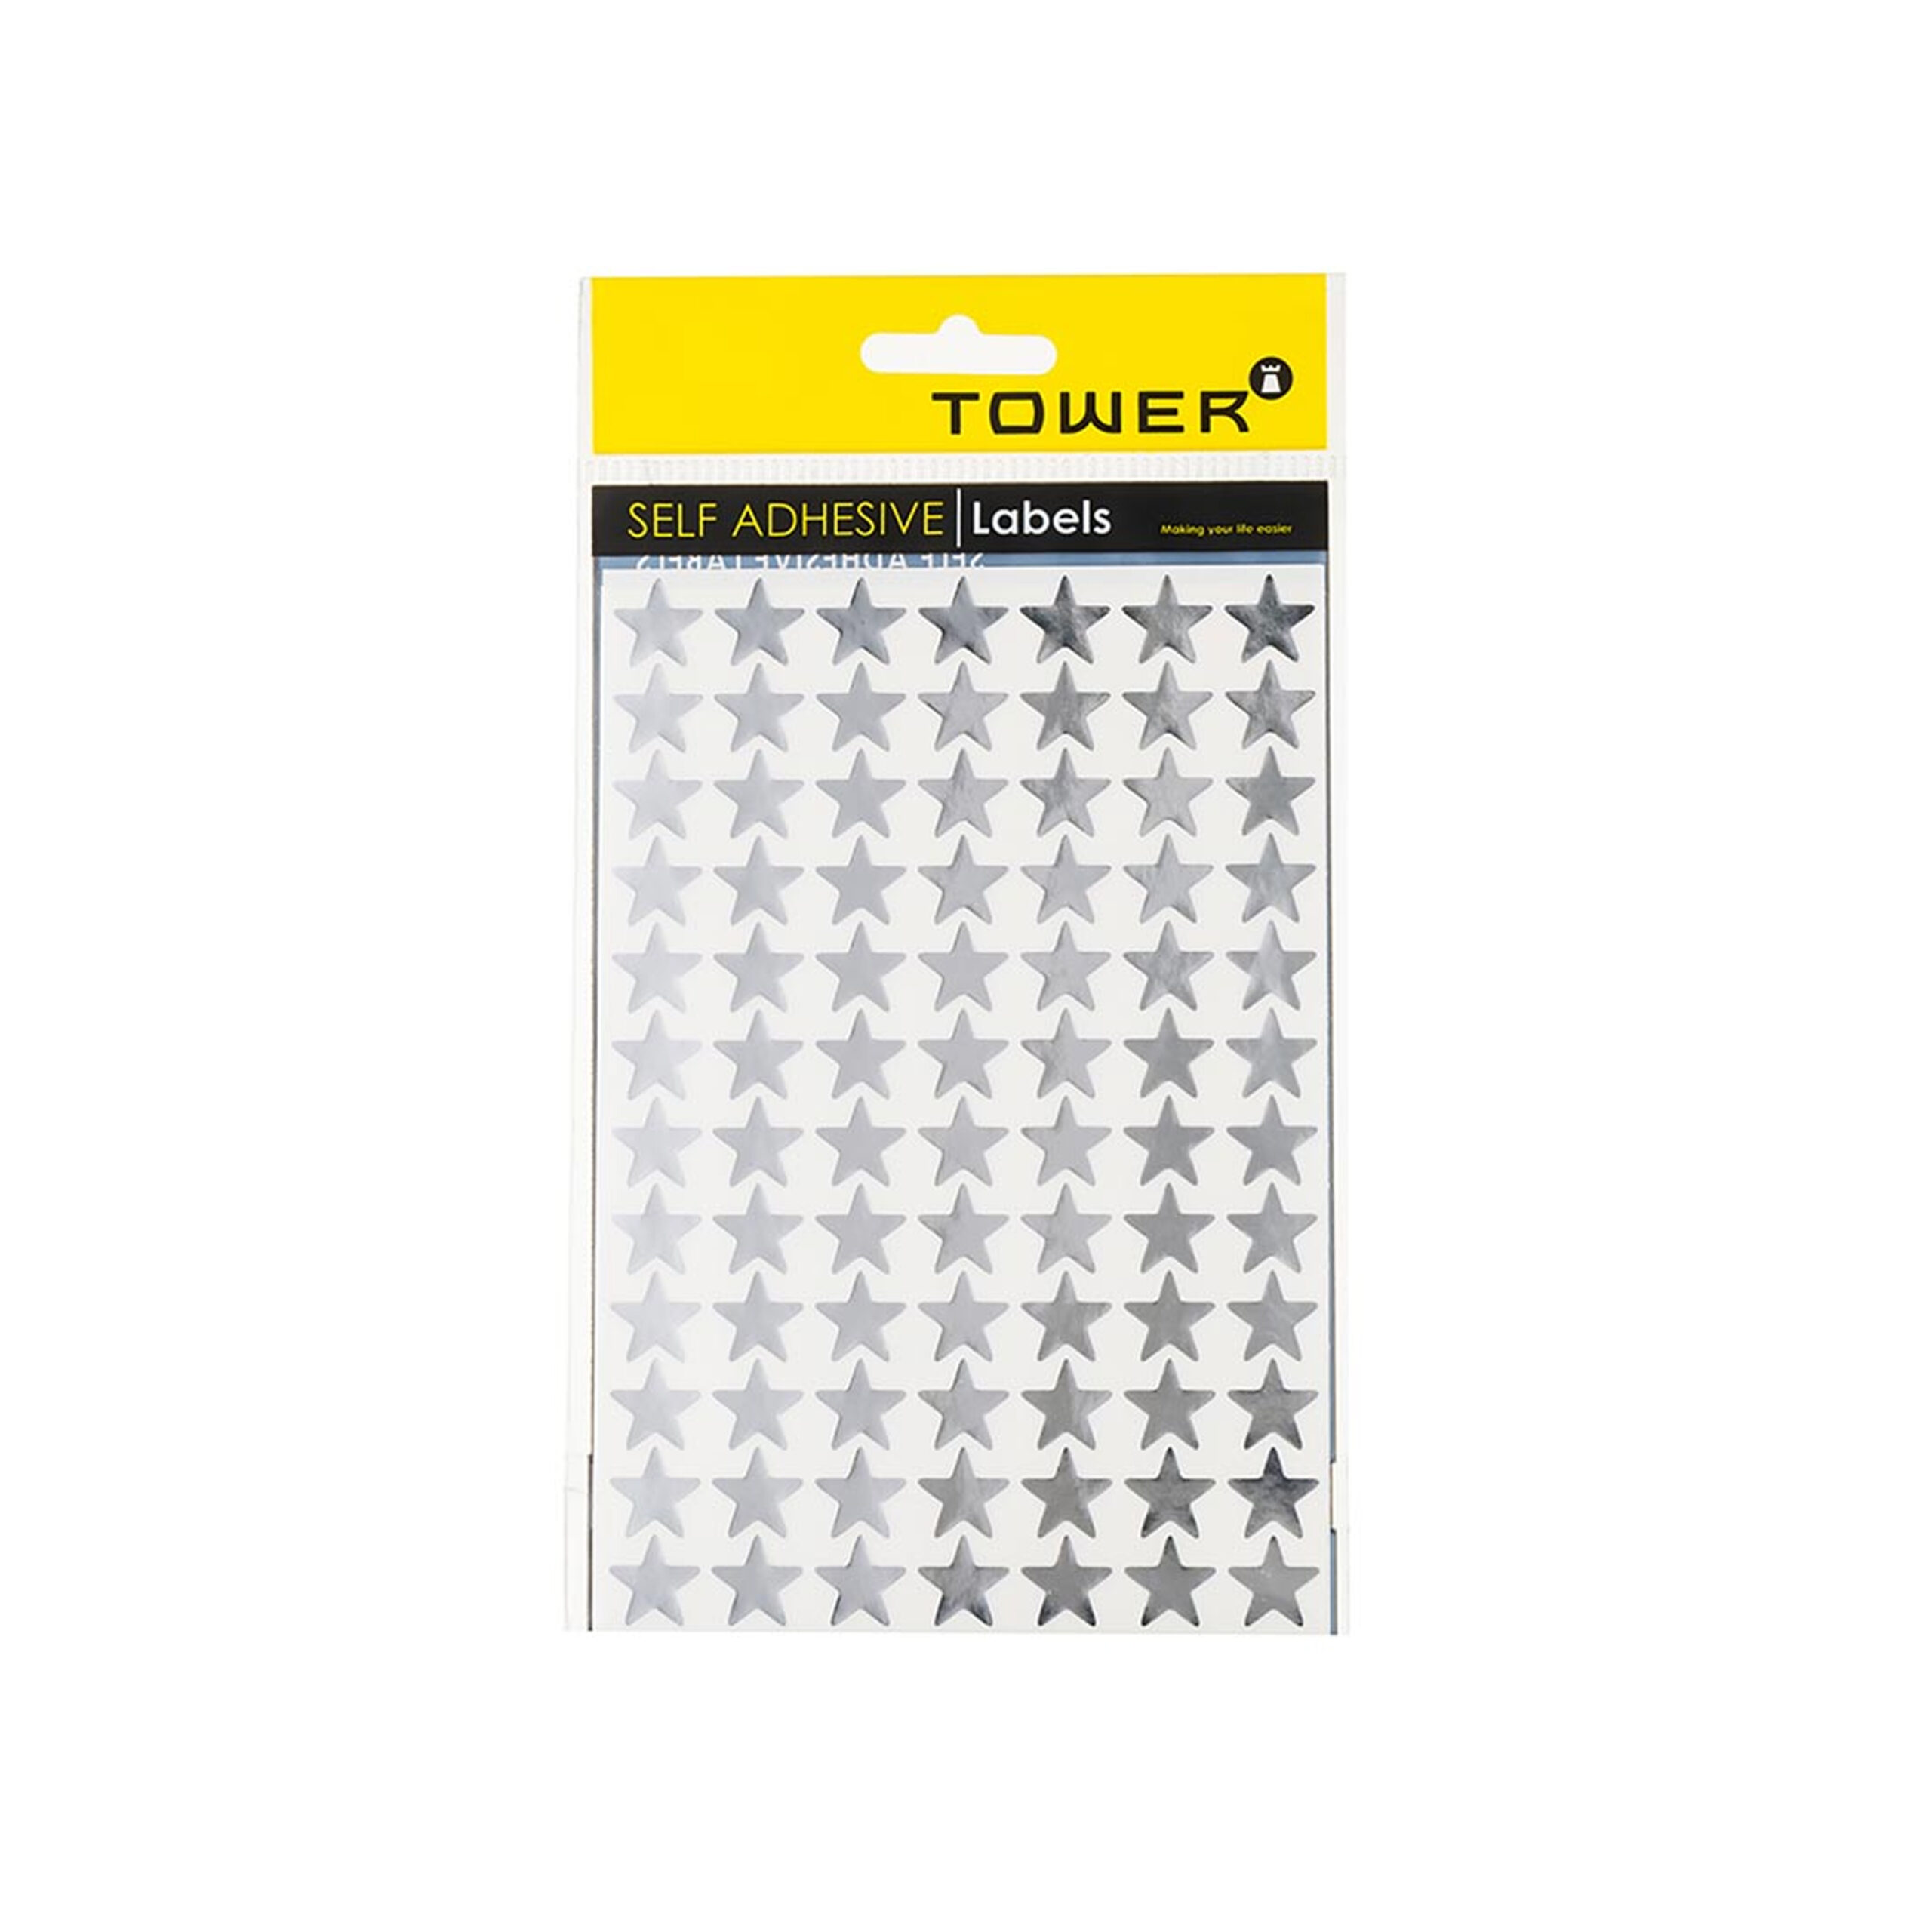 TOWER  SELF
ADHESIVE "SILVER
STARS"  (168
LABELS)